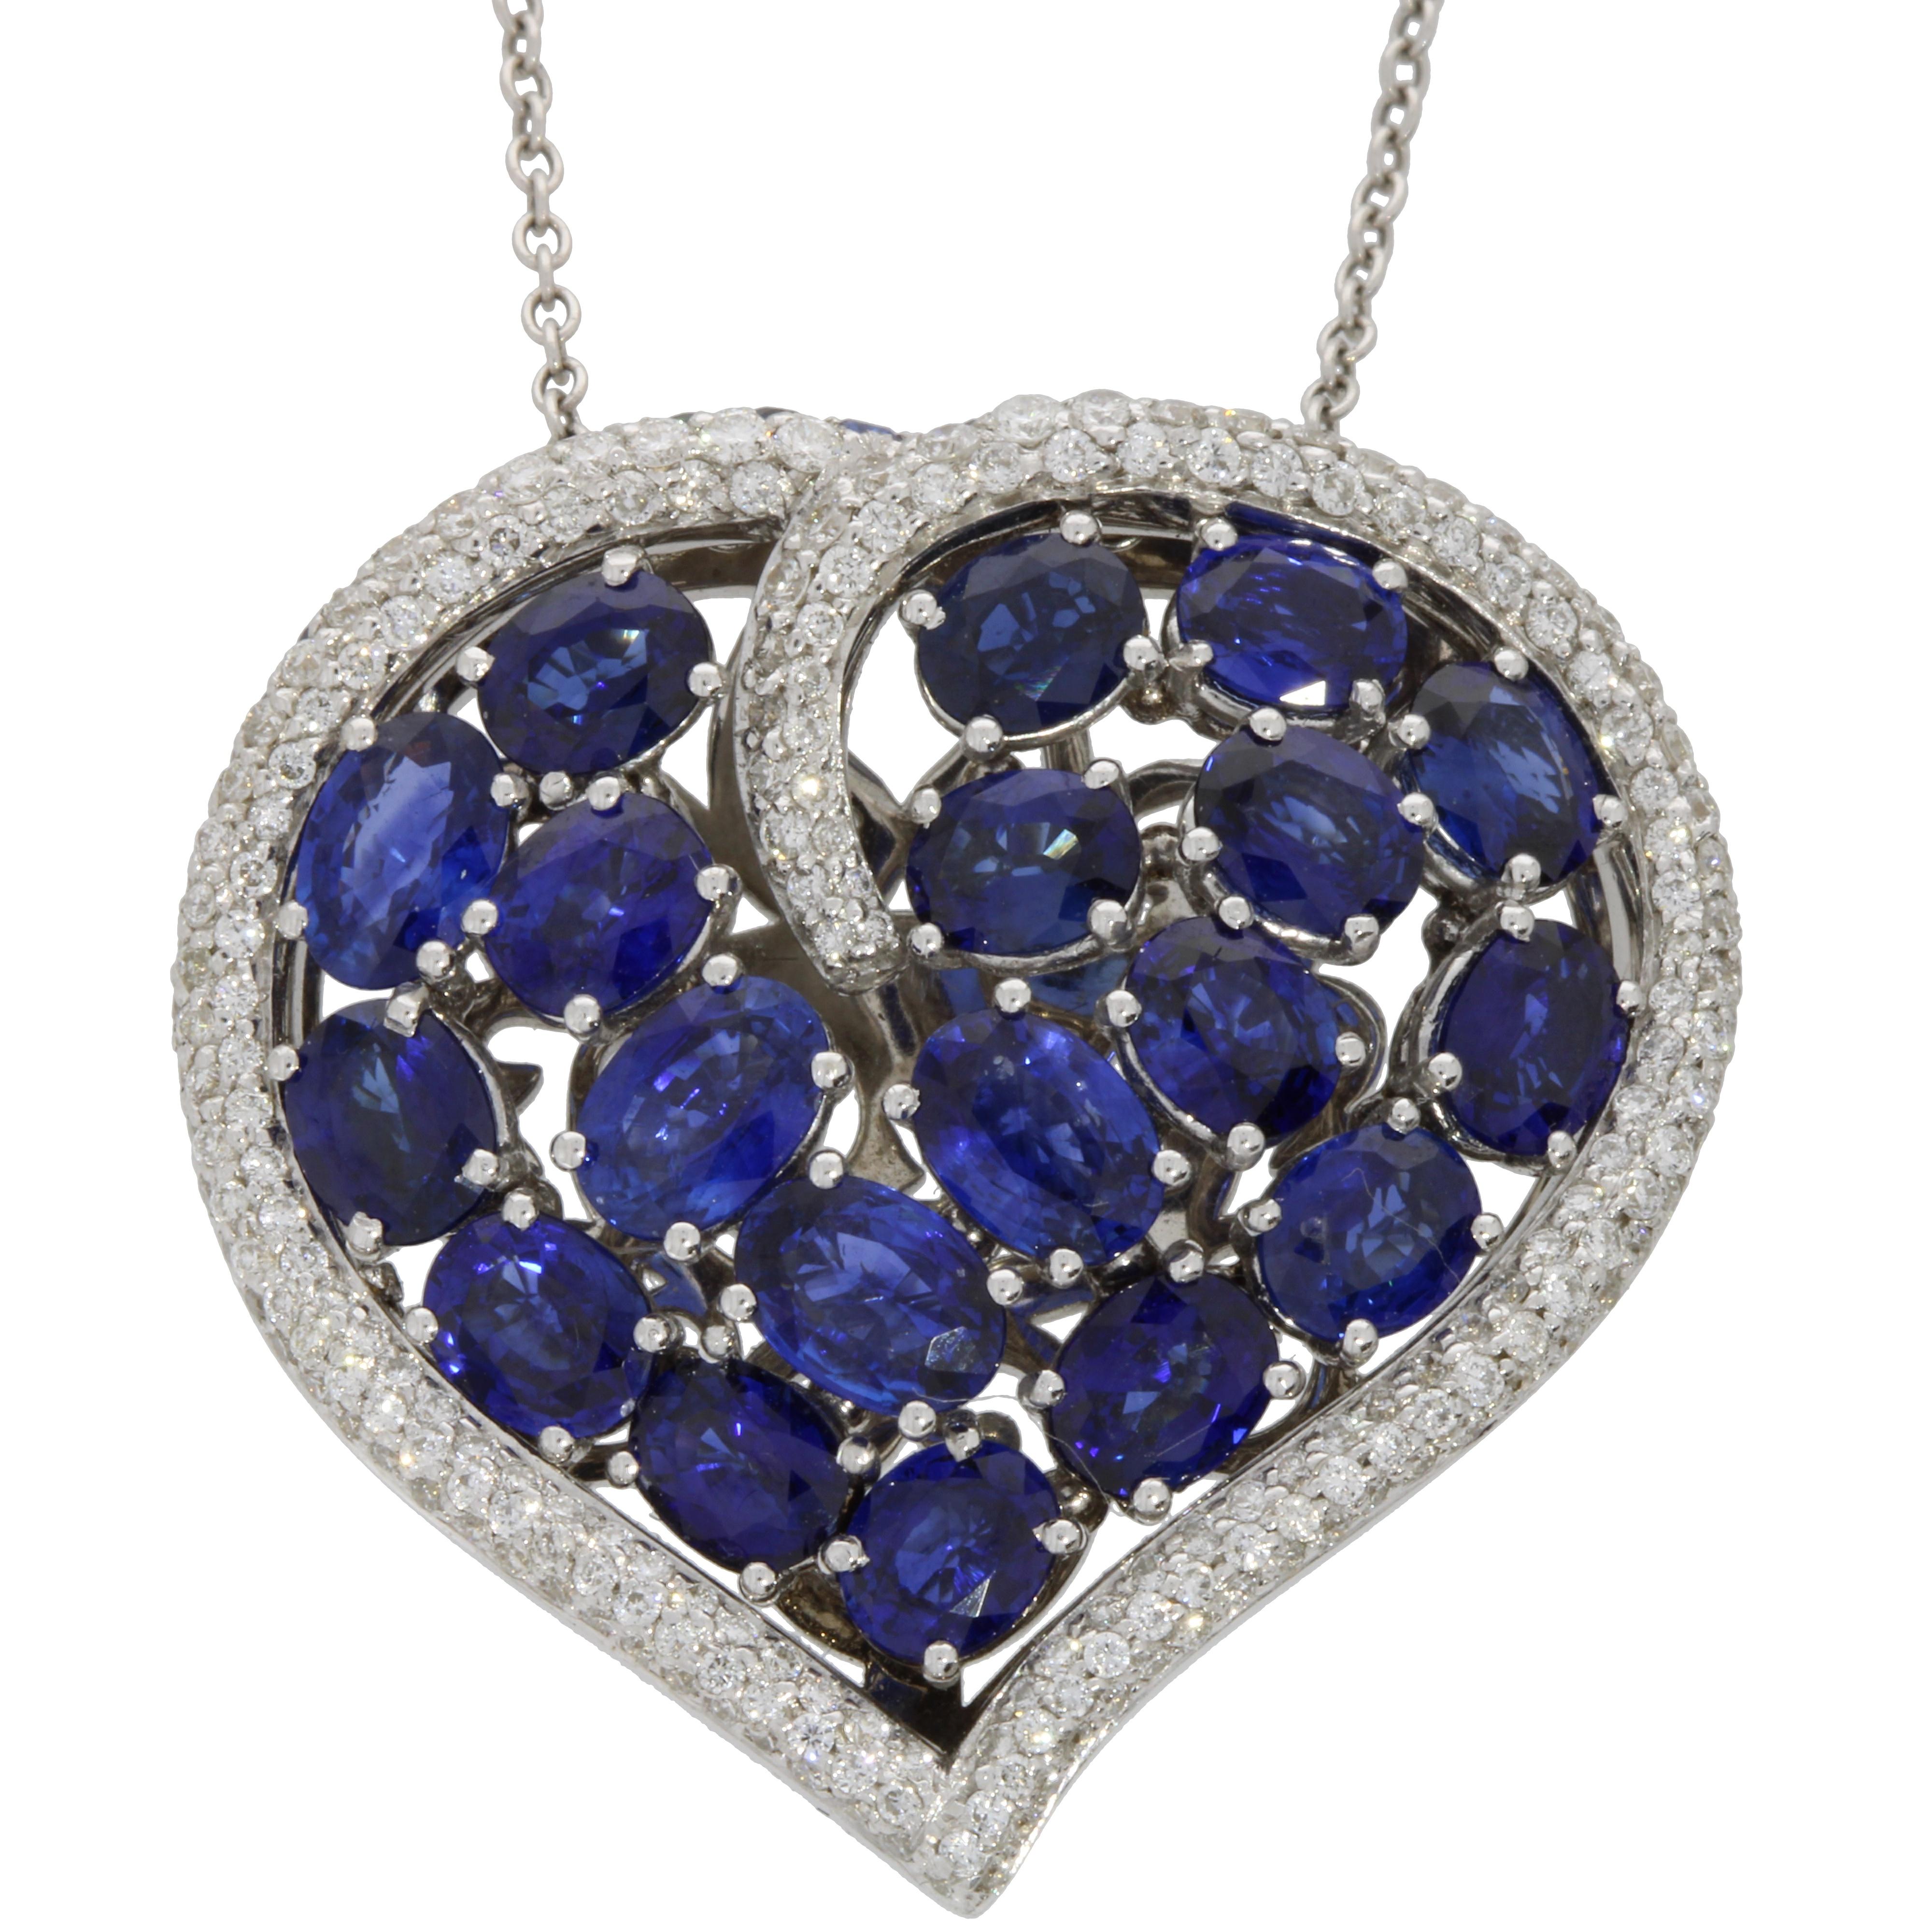 A symbolic curved heart of wonderful sapphires encircled from top quality diamonds for this amazing big heart pendant

Blue Sapphires and Diamonds Heart Pendant with Chain
Details
- 18 Karat White Gold 
- 9.00 Carat Oval cut Blue Sapphires
- 2.21